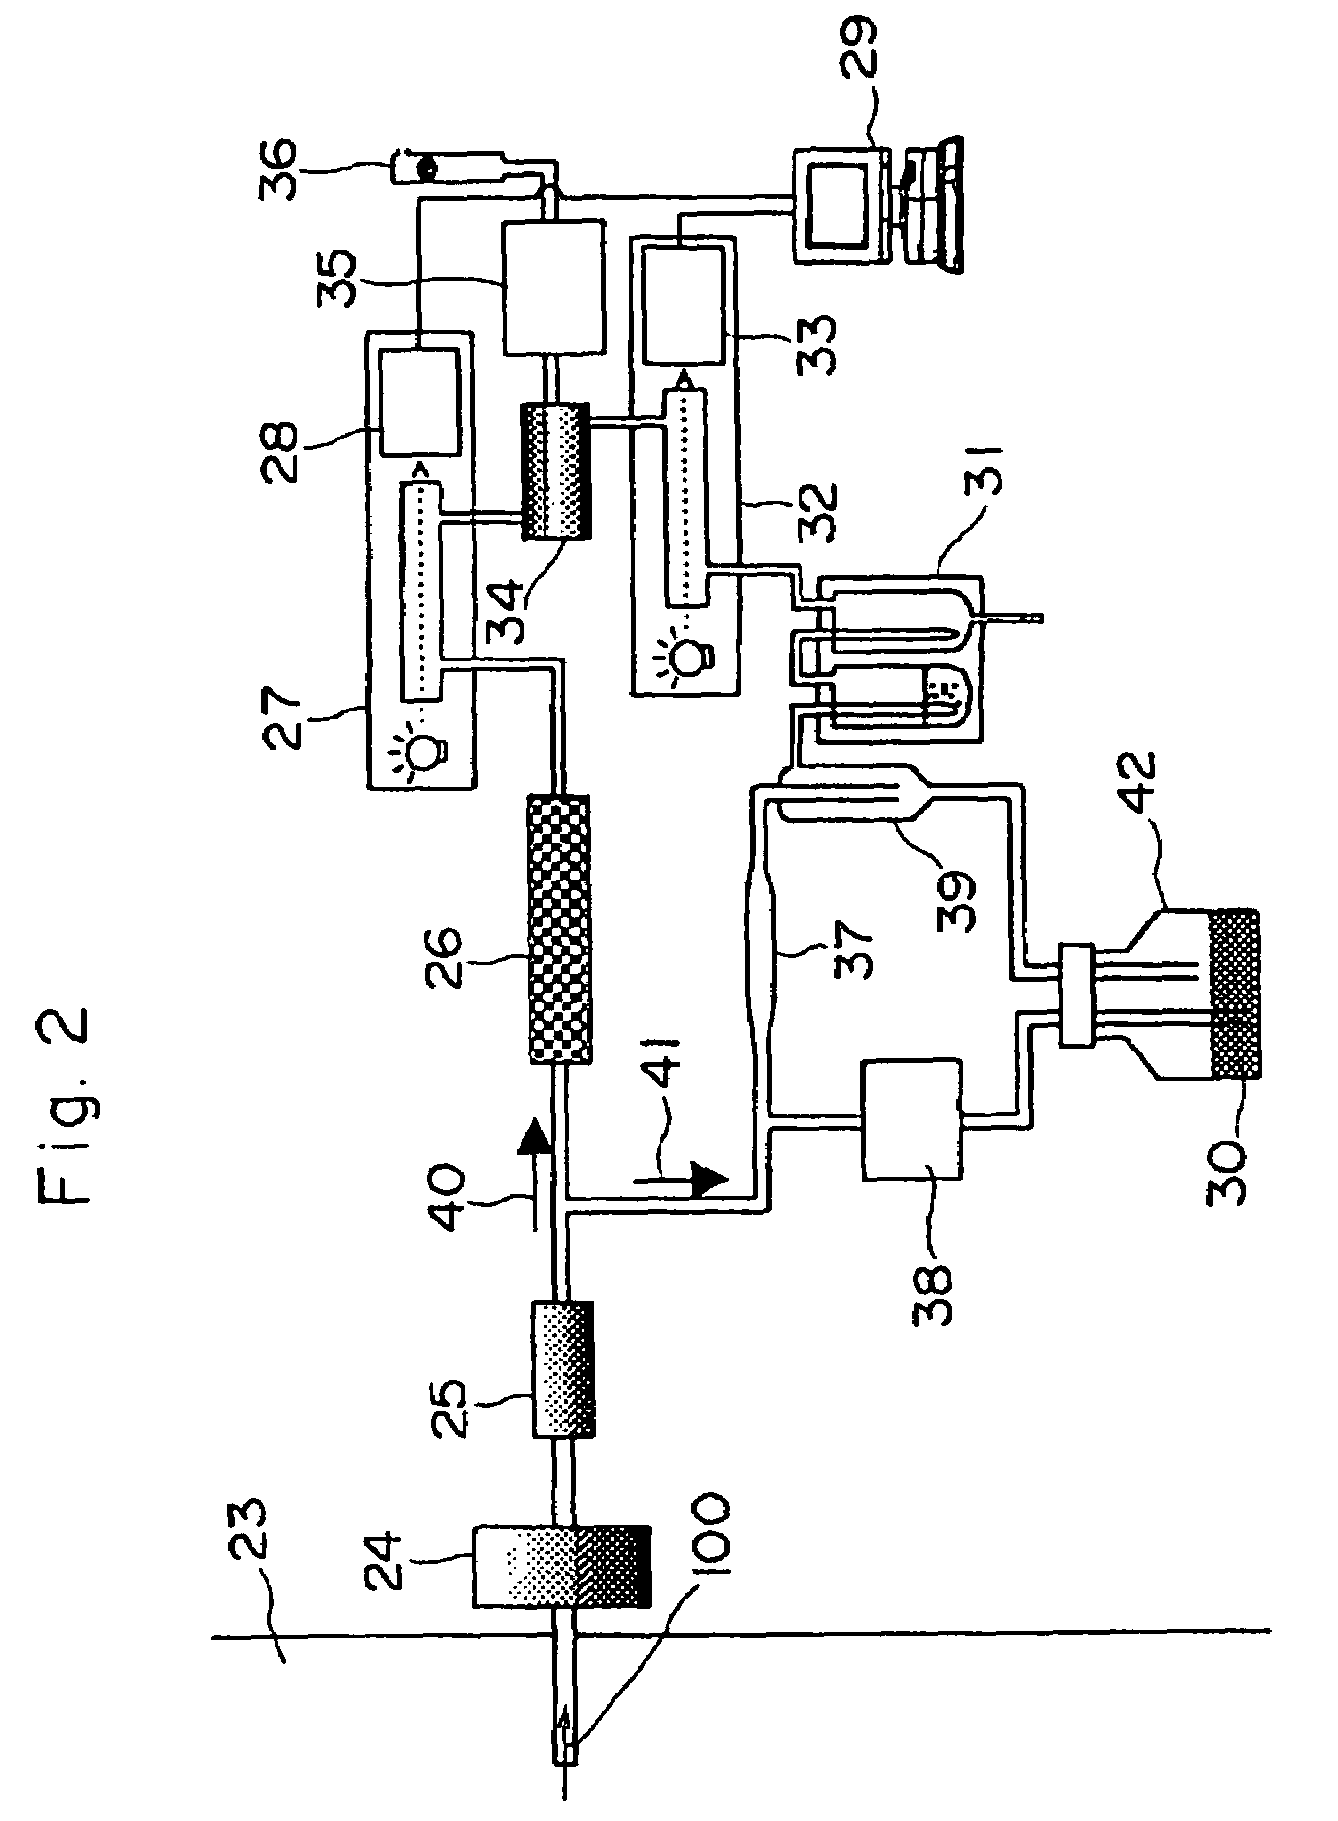 Method and apparatus for continuous fractional analysis of metallic mercury and water-soluble mercury in a gas